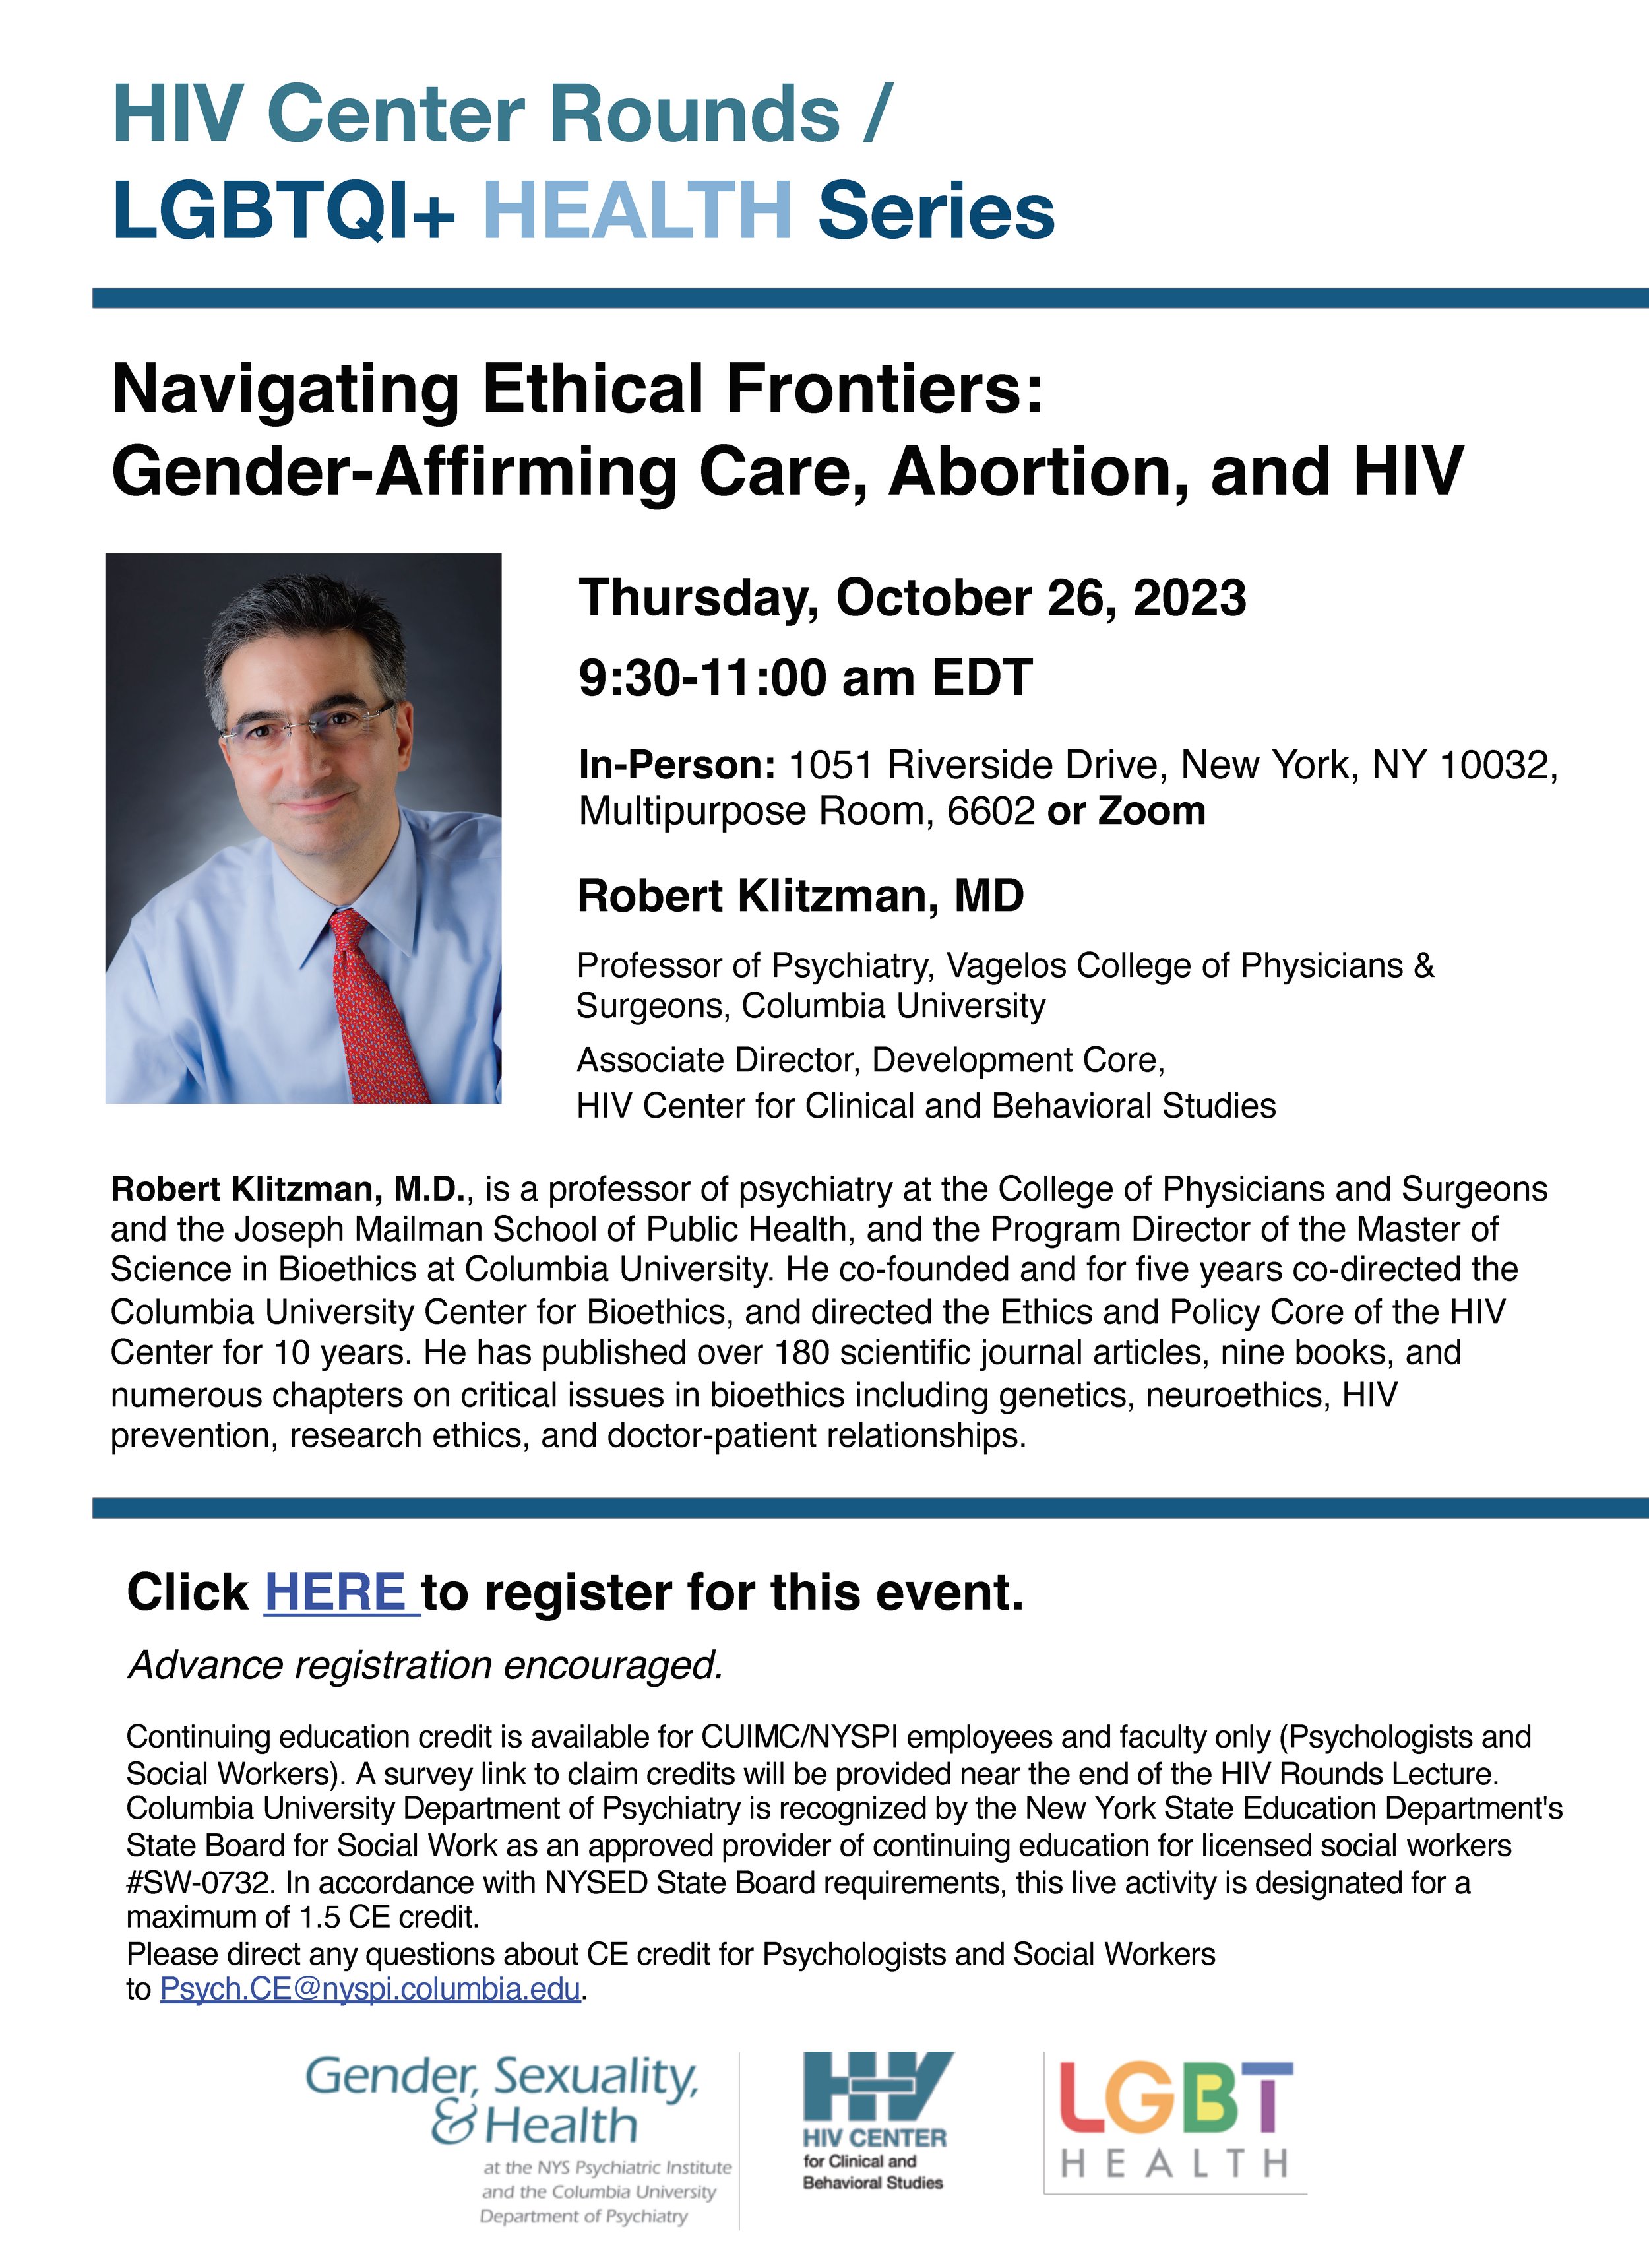 HIVCenterRounds-Program for the Study of LGBTQI+ Health_26Oct2023.jpg